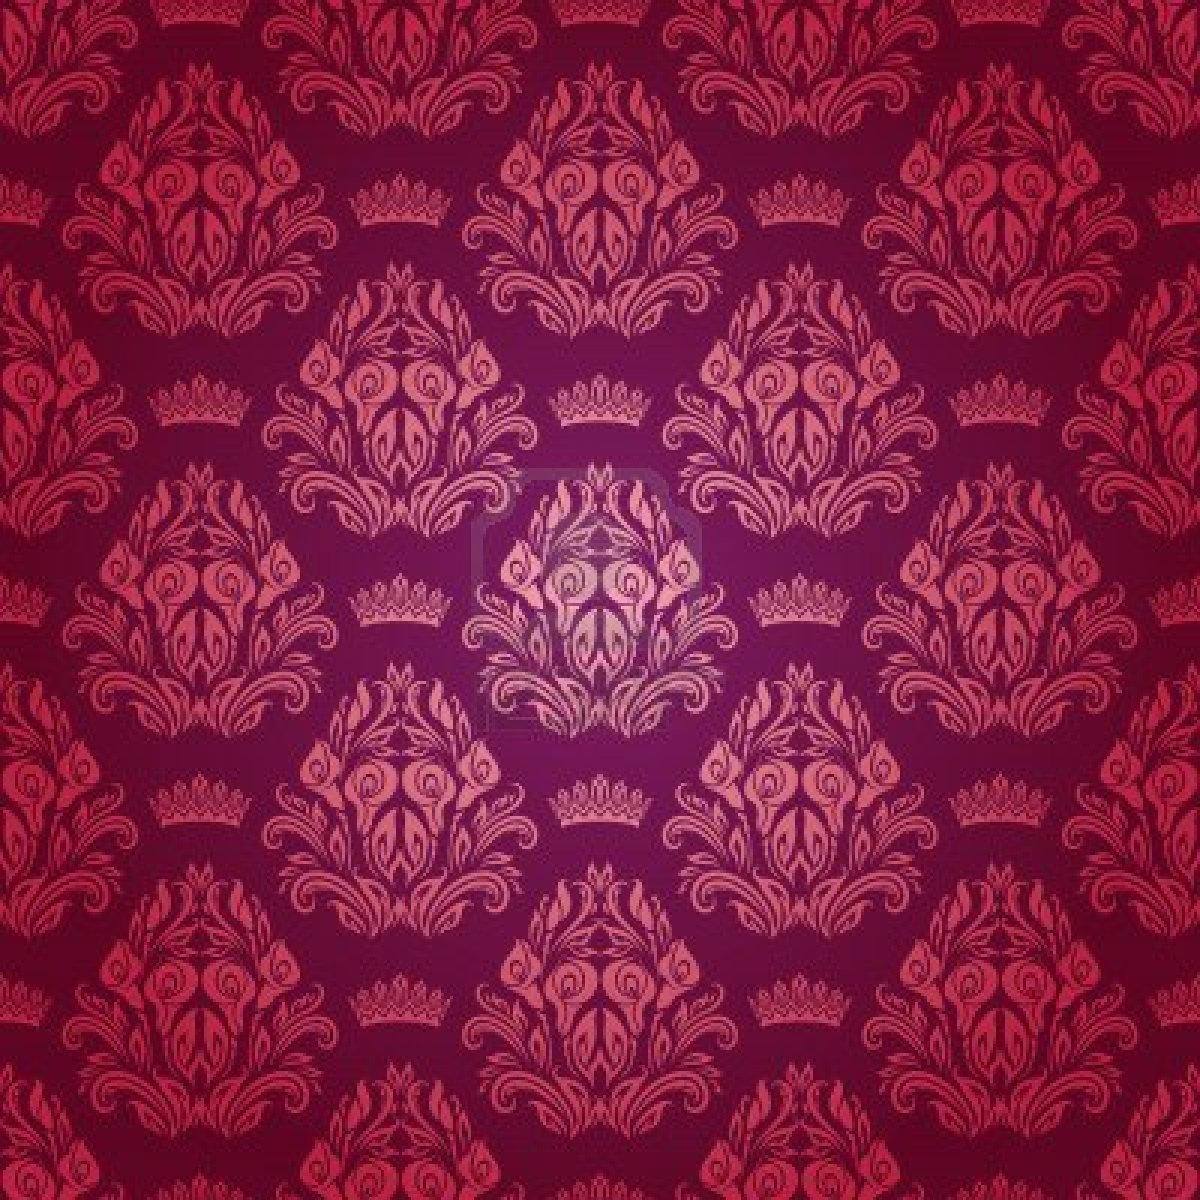 Free download pattern royal wallpaper flowers crowns on a purple background  eps 10 [1200x1200] for your Desktop, Mobile & Tablet | Explore 48+ Royal  Purple Wallpaper | Royal Blue Backgrounds, Crown Royal